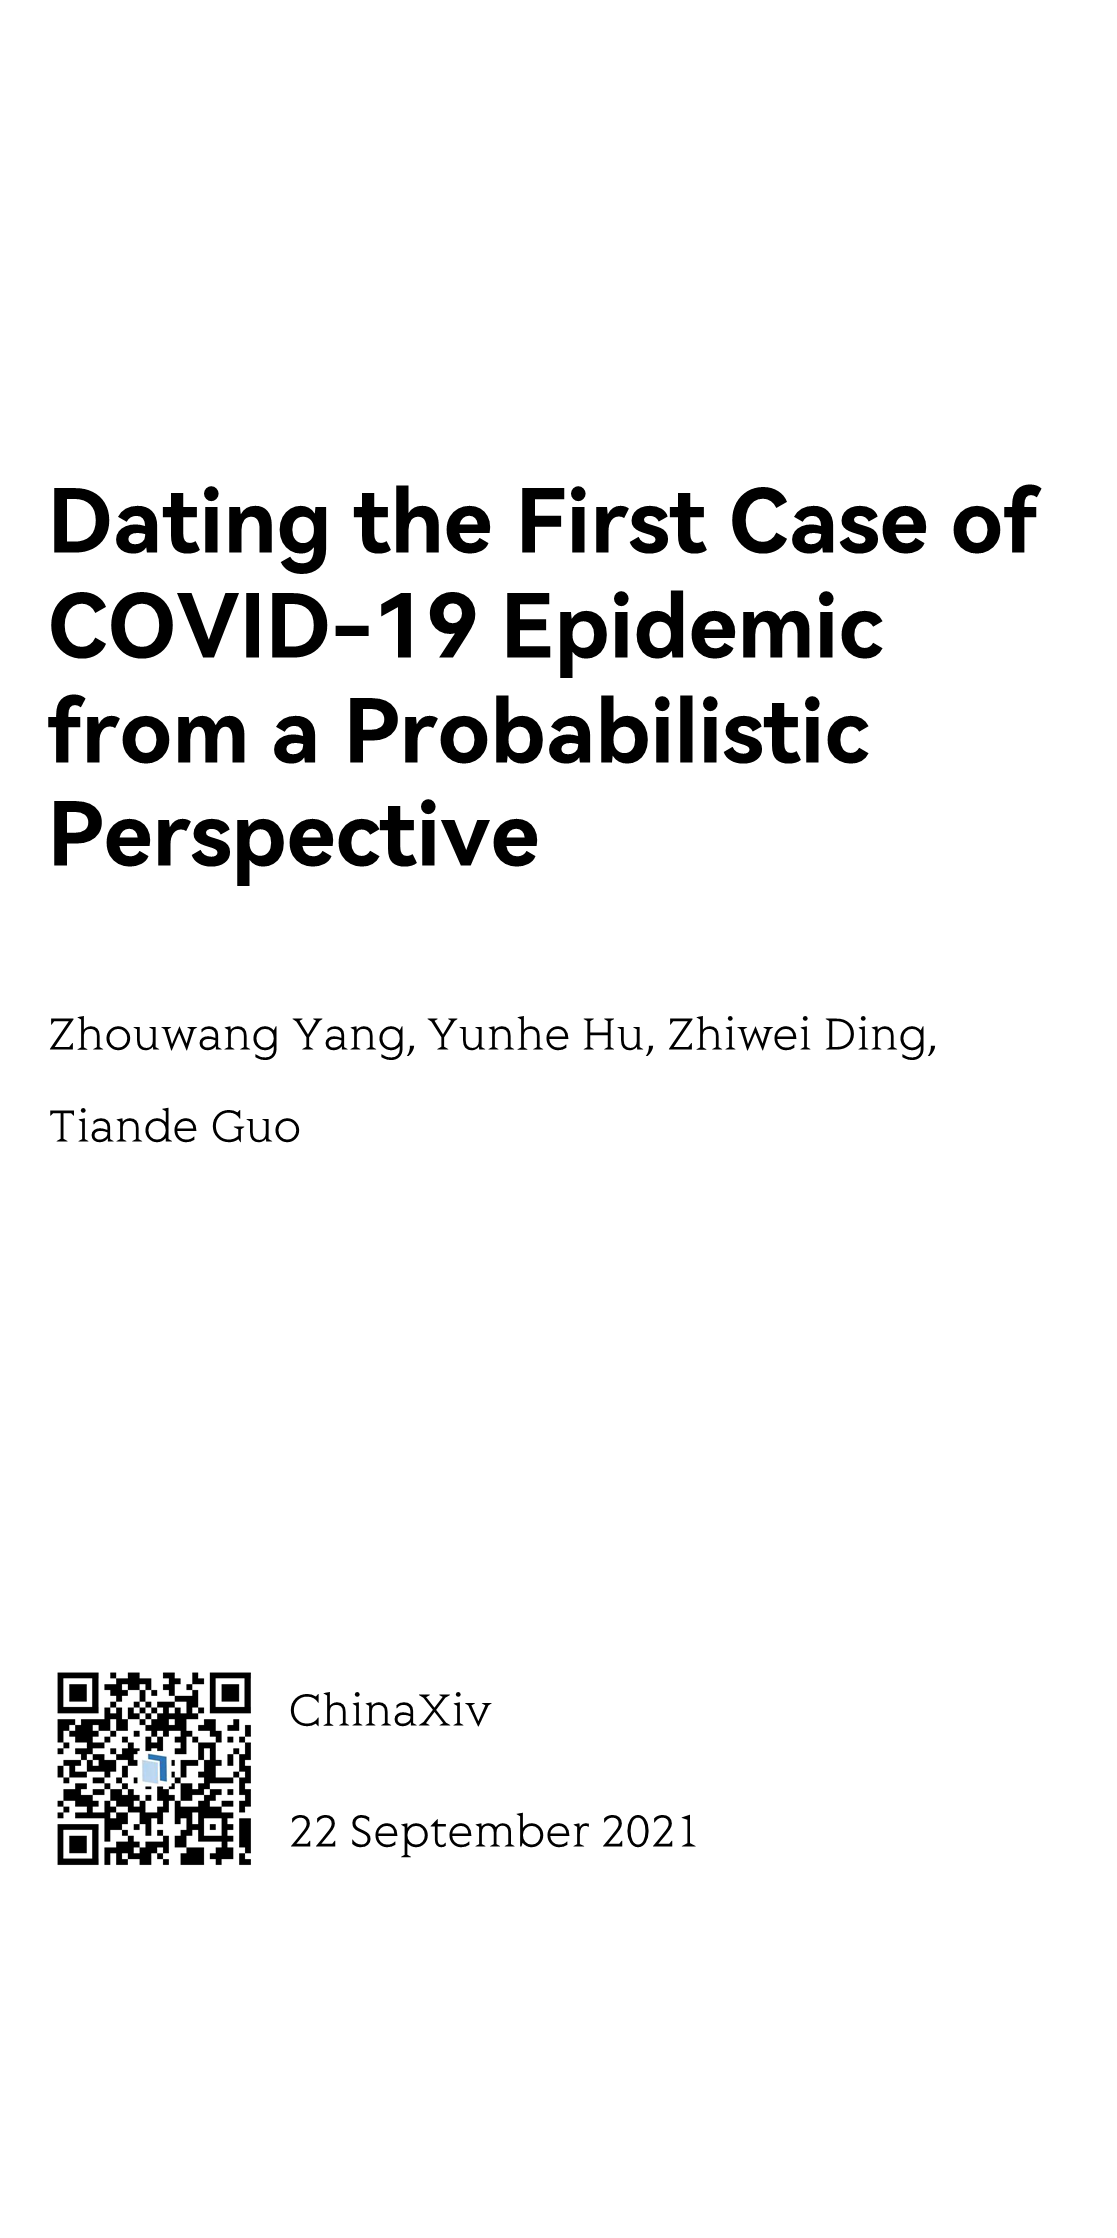 Dating the First Case of COVID-19 Epidemic from a Probabilistic Perspective_1